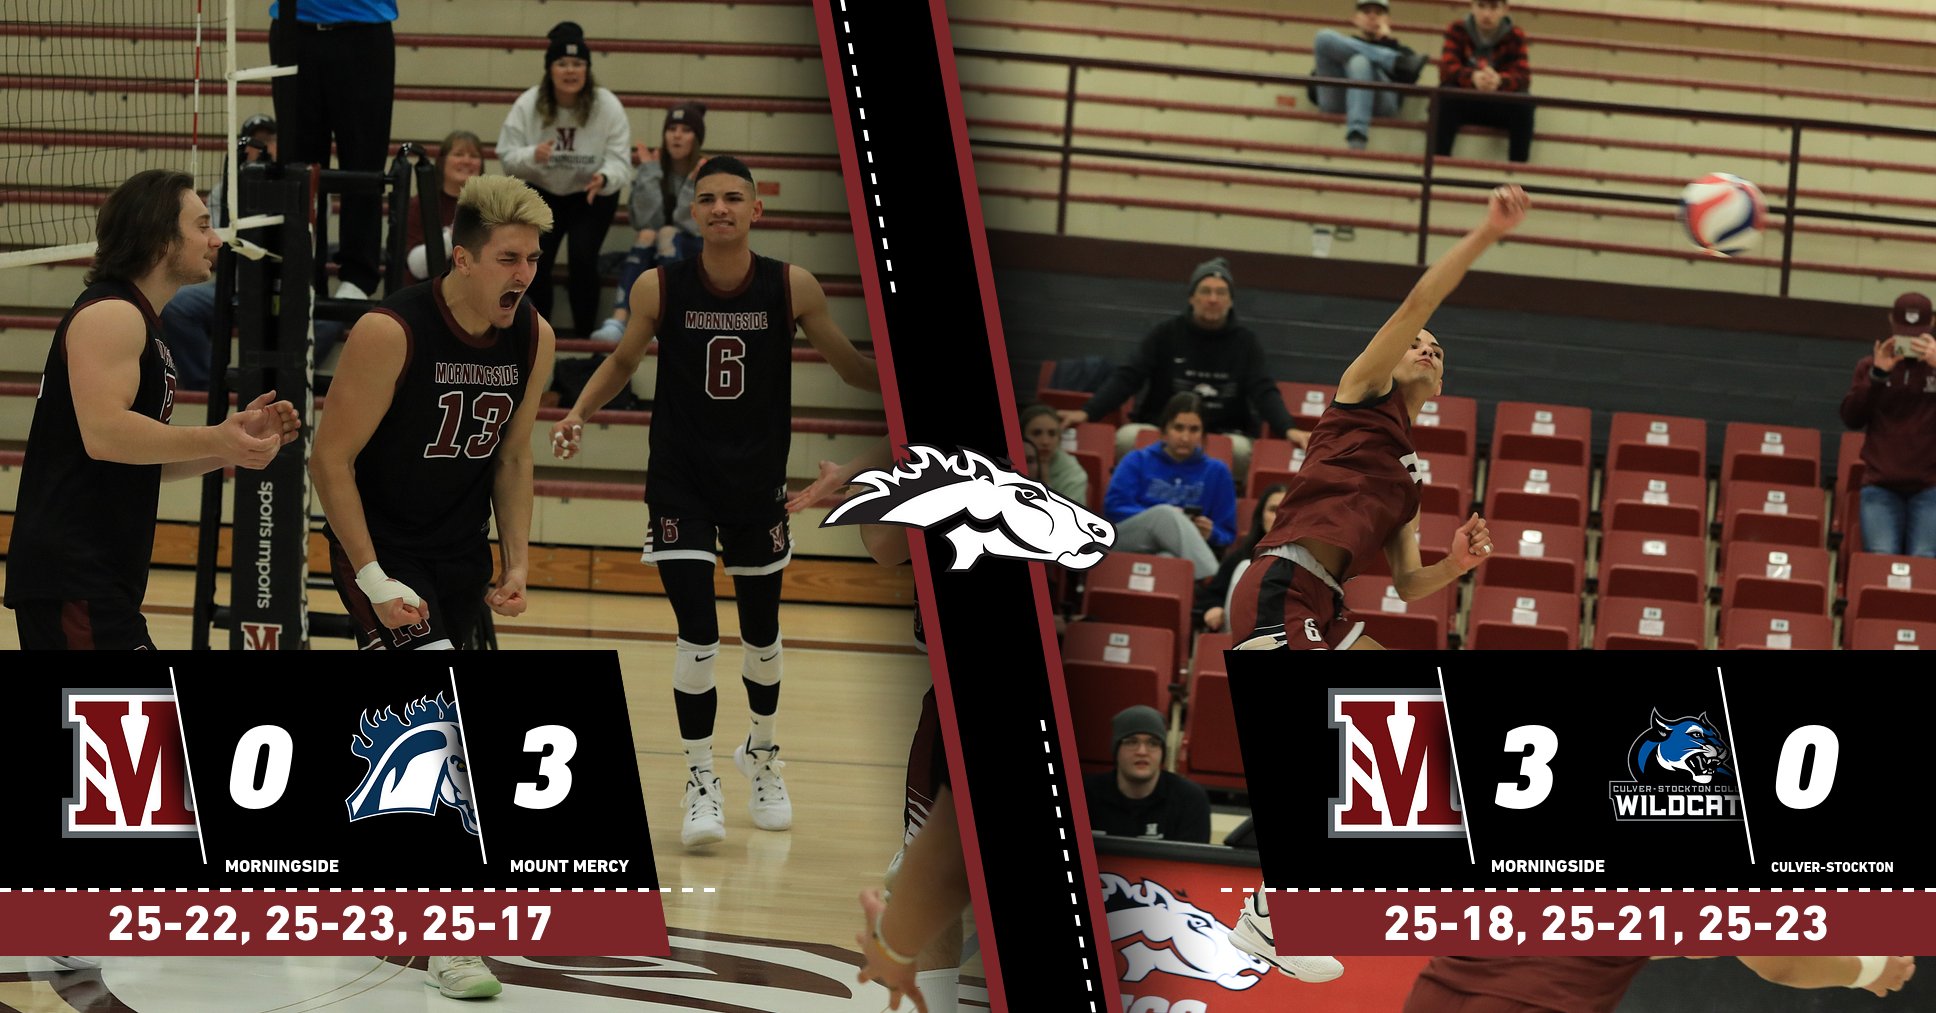 Men's volleyball vs Mount Mercy and Culver Stockton.